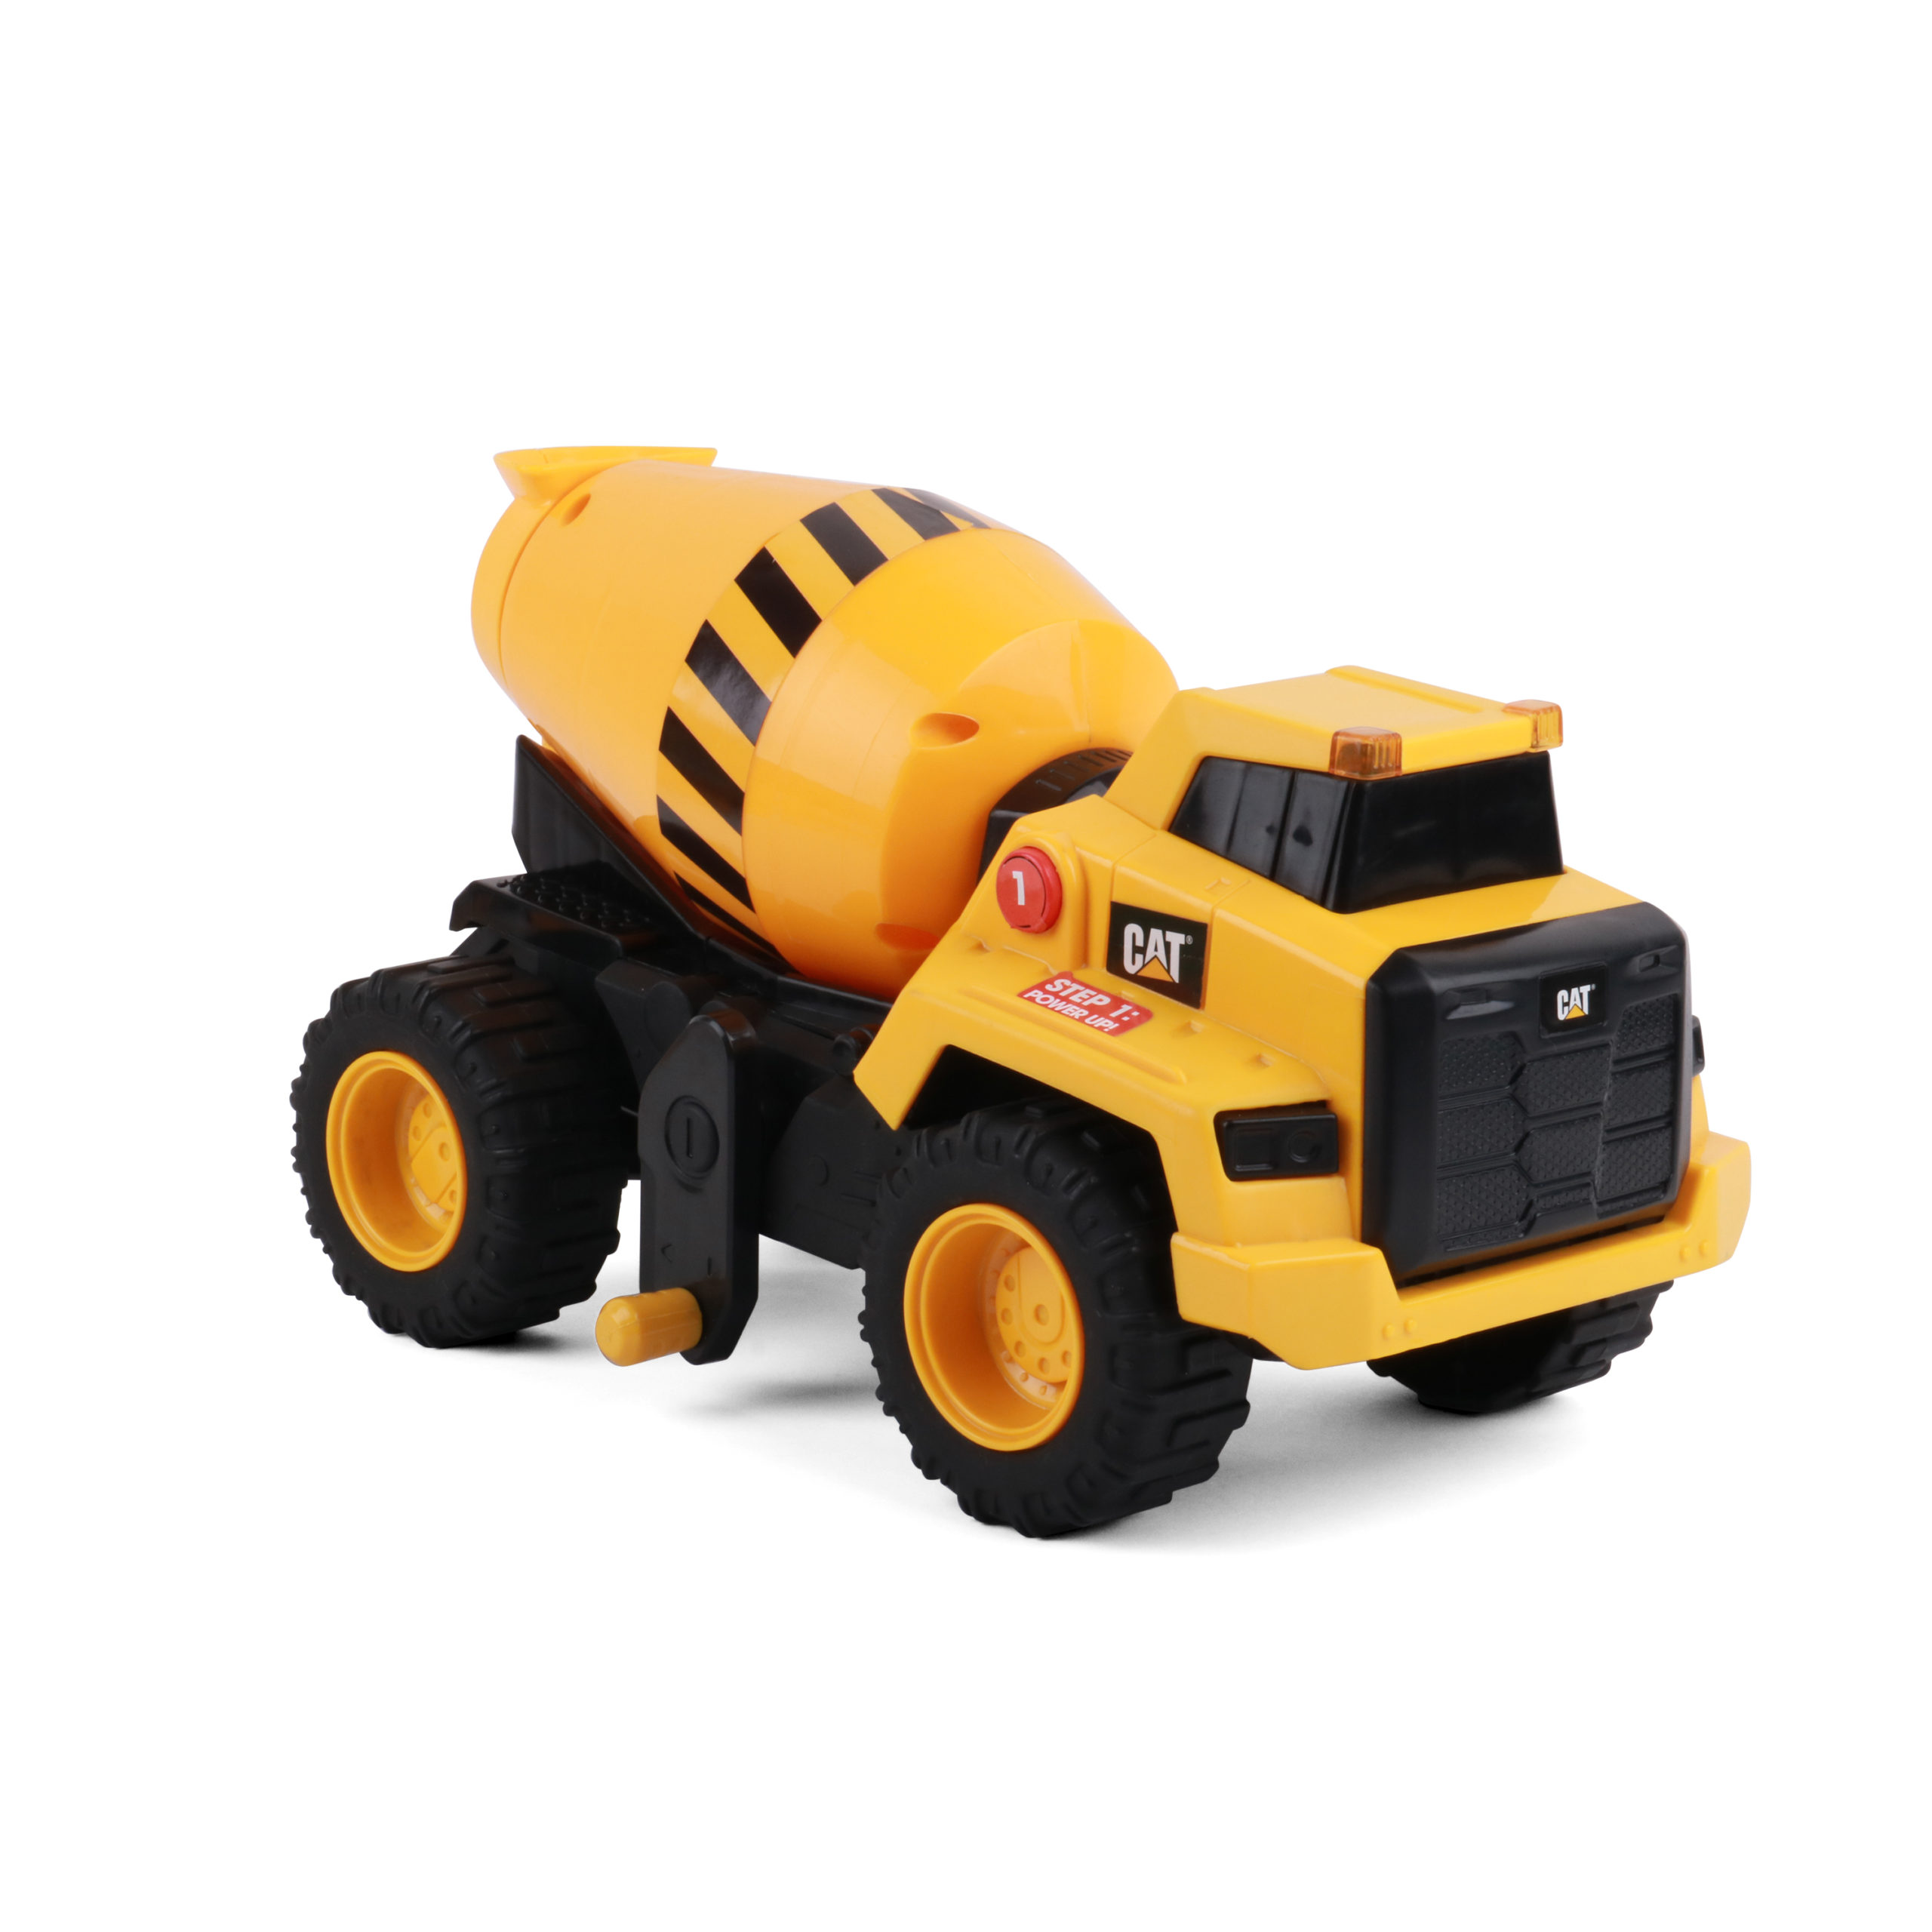 Friction Powered Cement Mixer Truck Toy with Lights and Sound Scale 1:18 